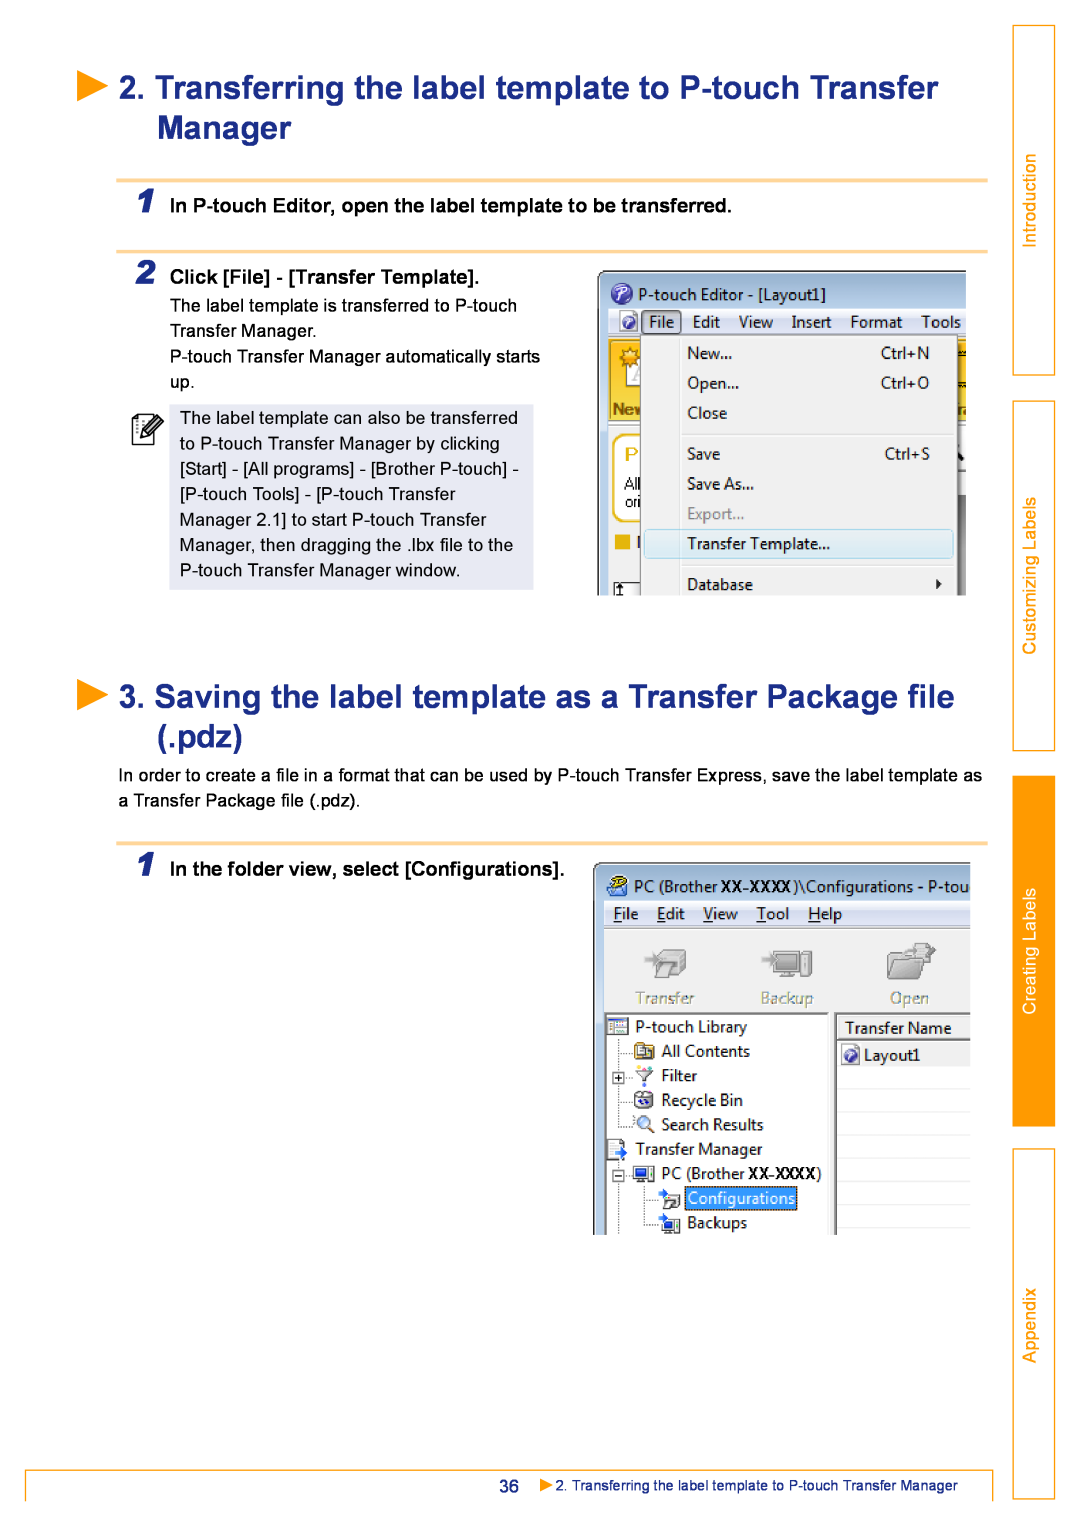 Brother TD-4000 Transferring the label template to P-touch Transfer Manager, Click File - Transfer Template, Appendix 